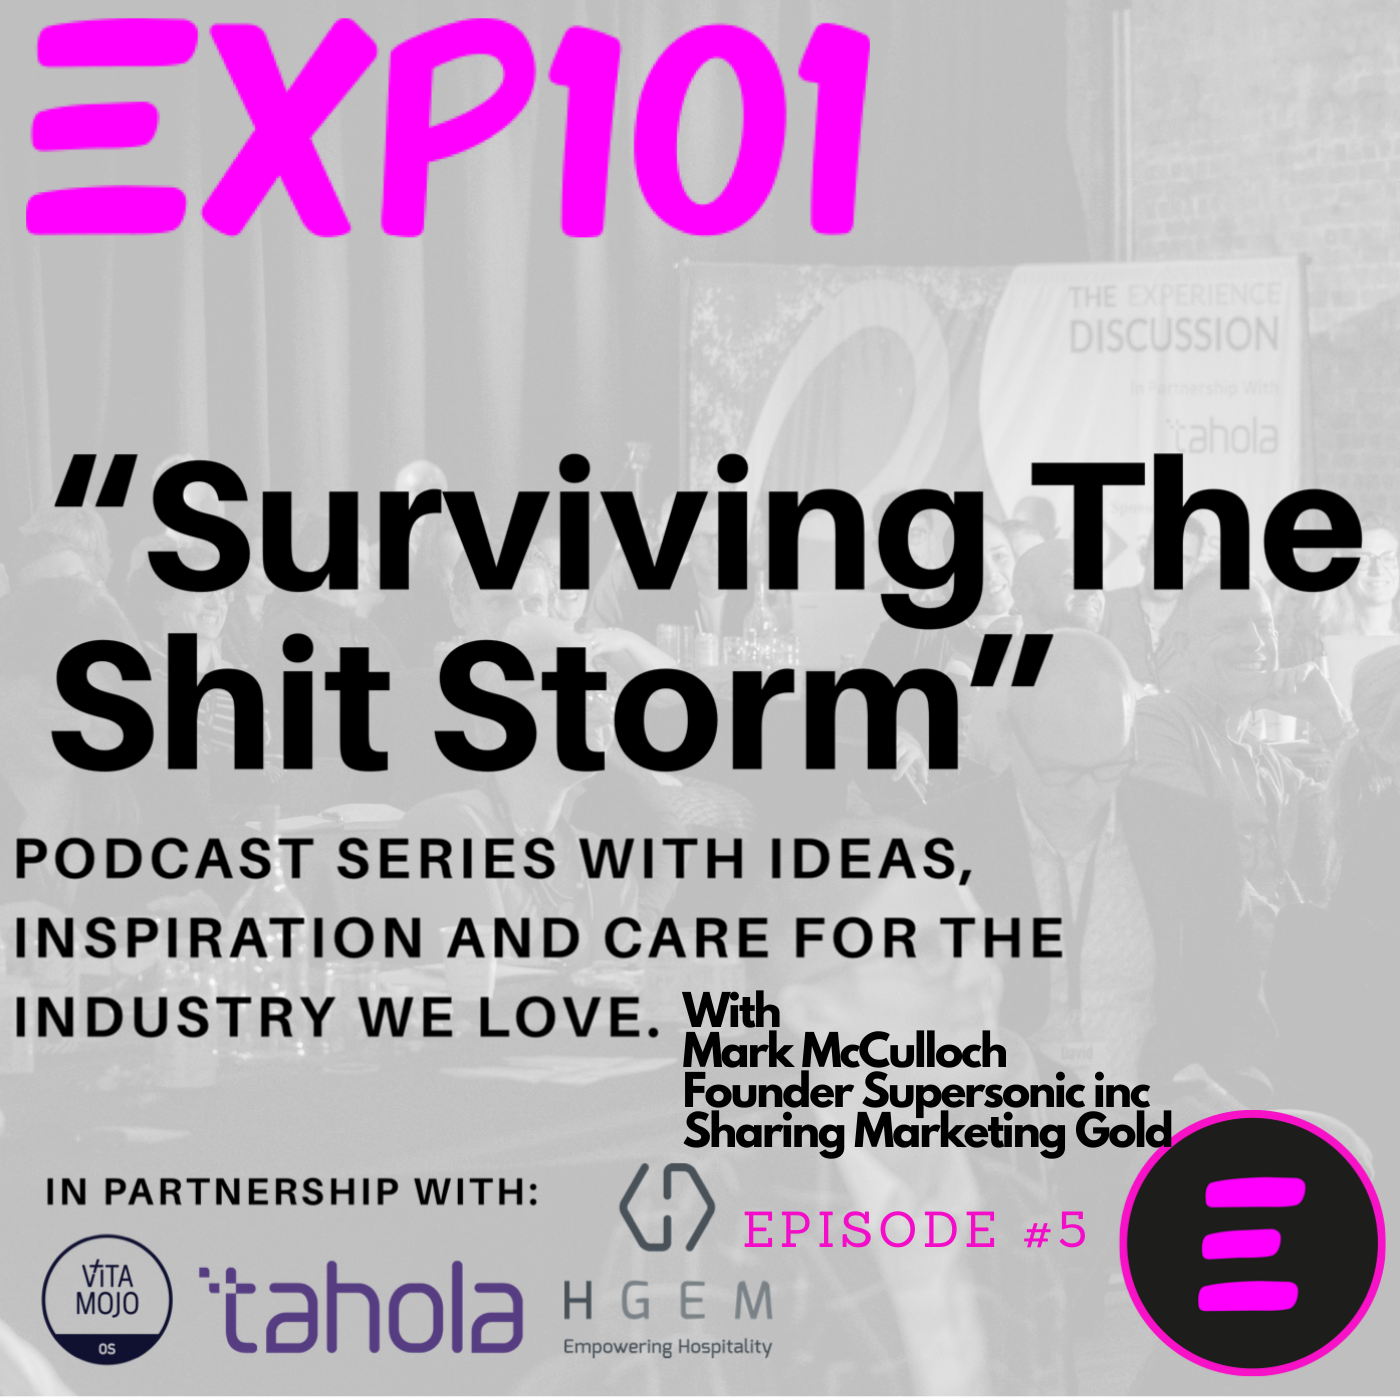 Surviving The Shit Storm Episode 5 with Mark McCulloch, Founder and CEO of Supersonic Inc Image